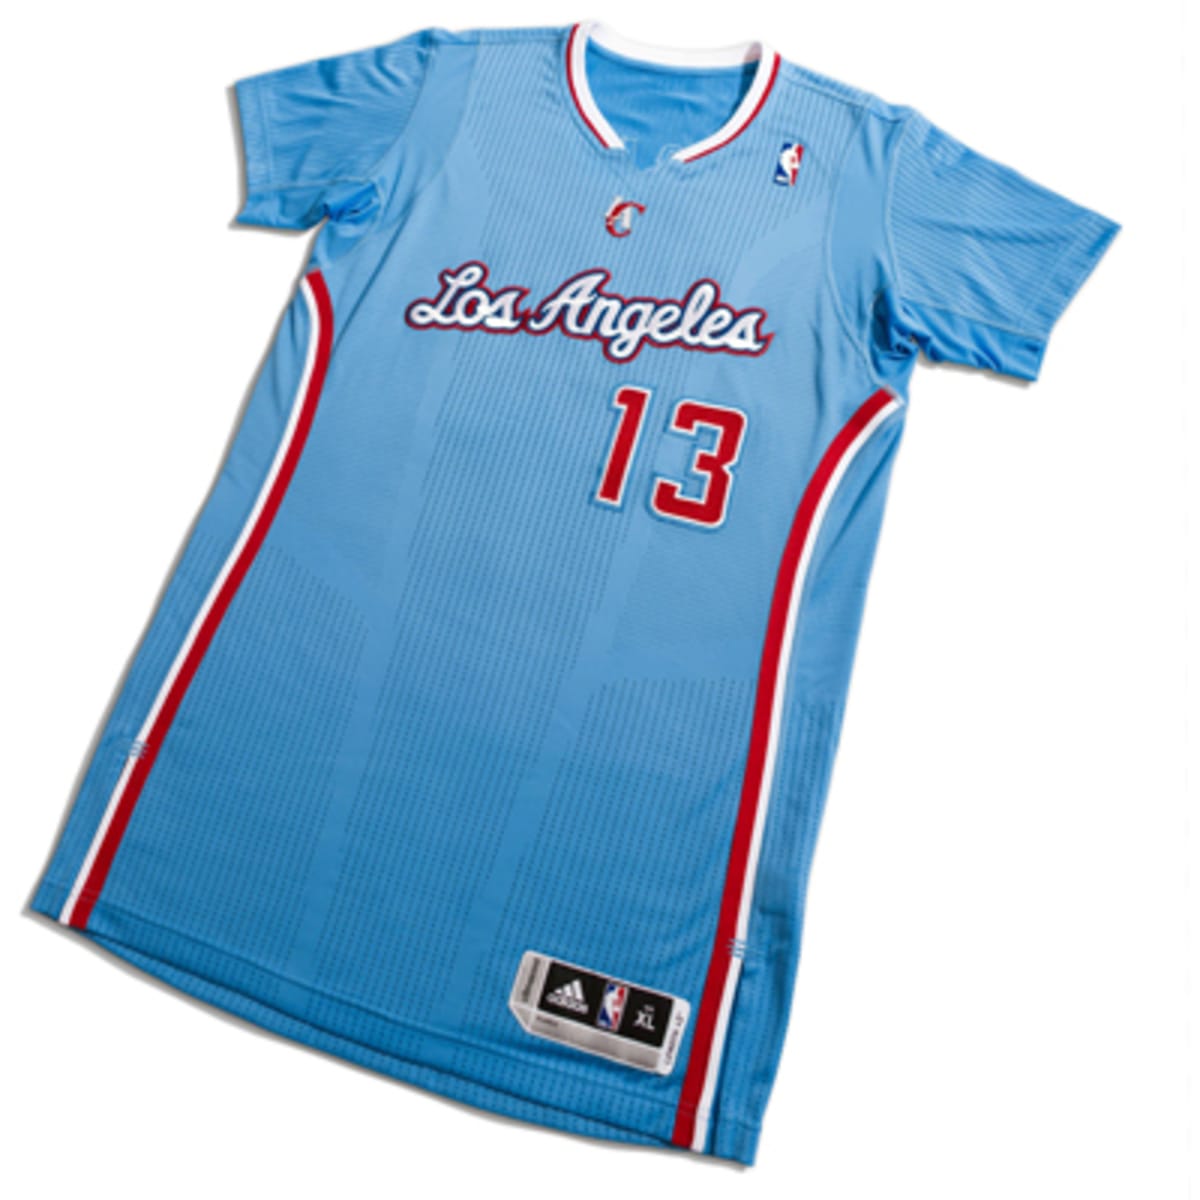 blake griffin pistons teal jersey